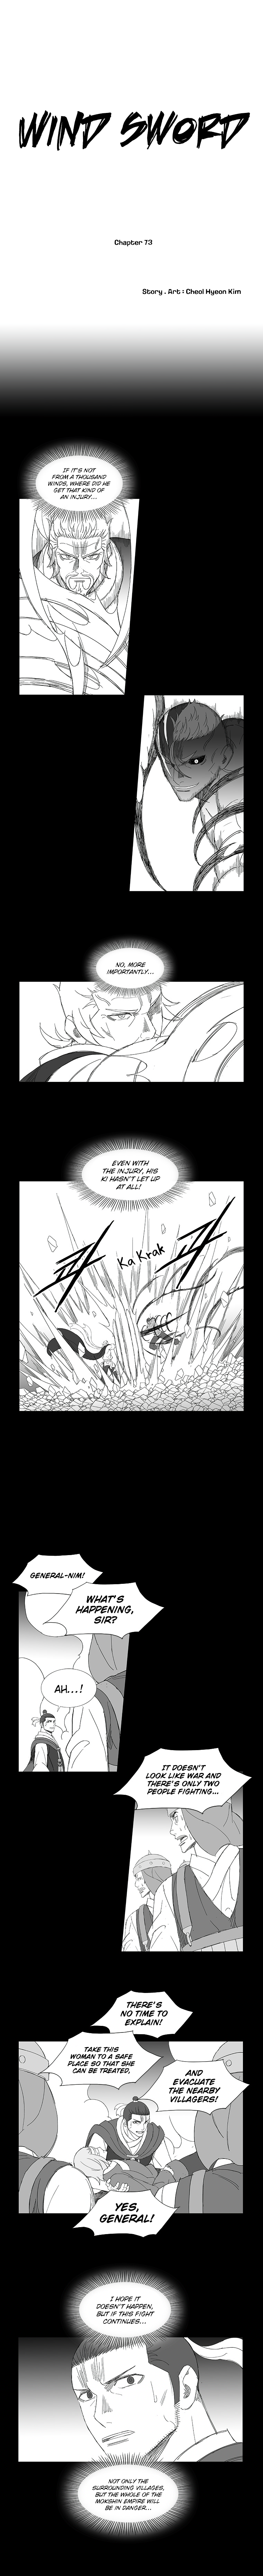 Wind Sword - Chapter 9102 - Image 1